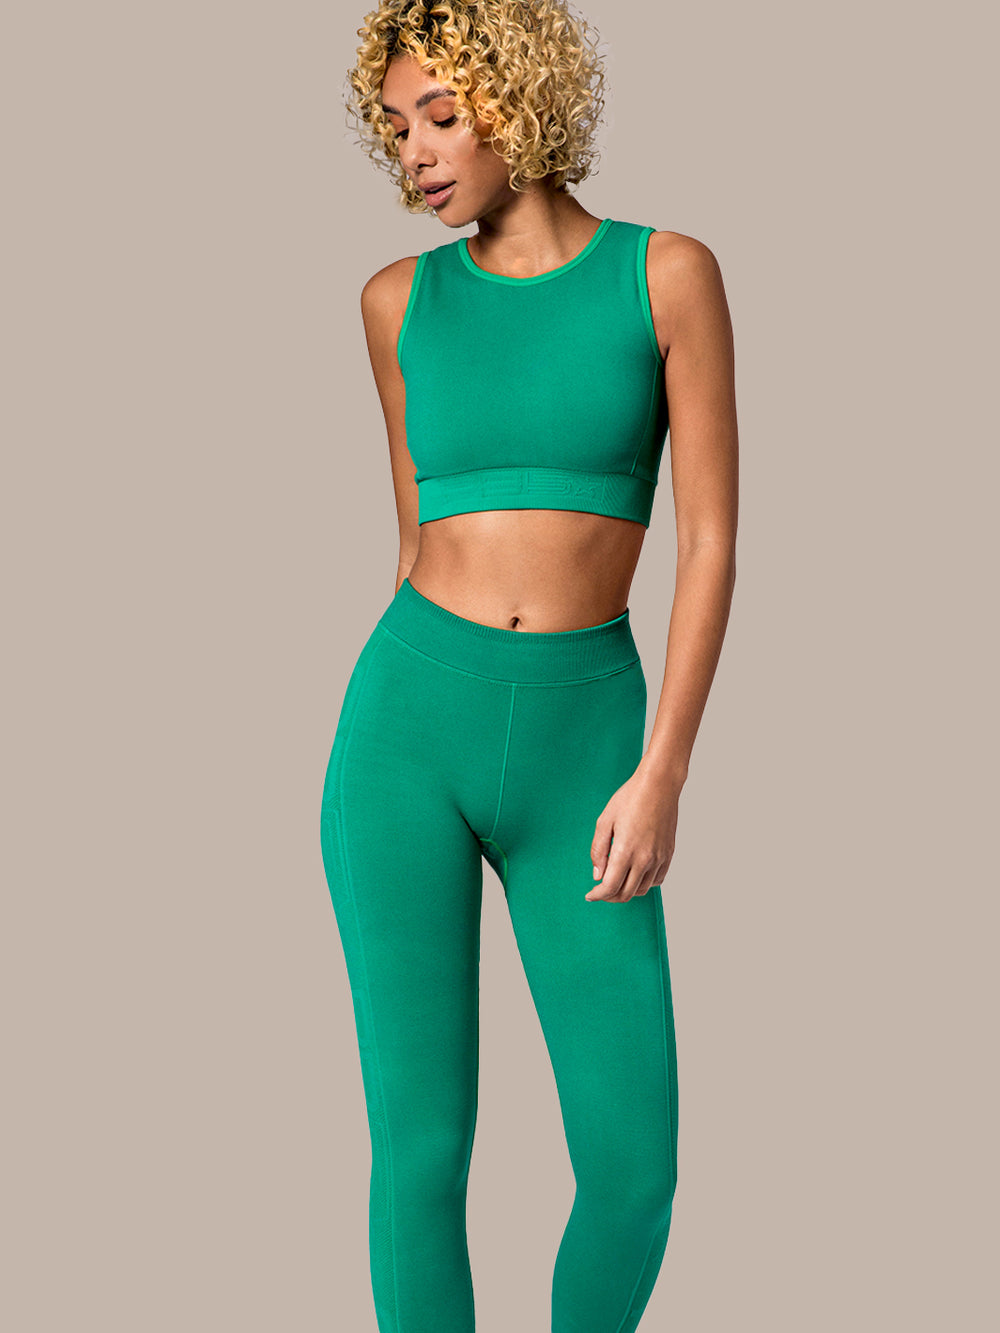 Woman modeling the PB5star 7/8 Seamless Compression Leggings in jade, paired with a coordinated Compression Knit Sports Bra. These high-waisted leggings are designed for the active pickleball player, with a focus on comfort and performance. 